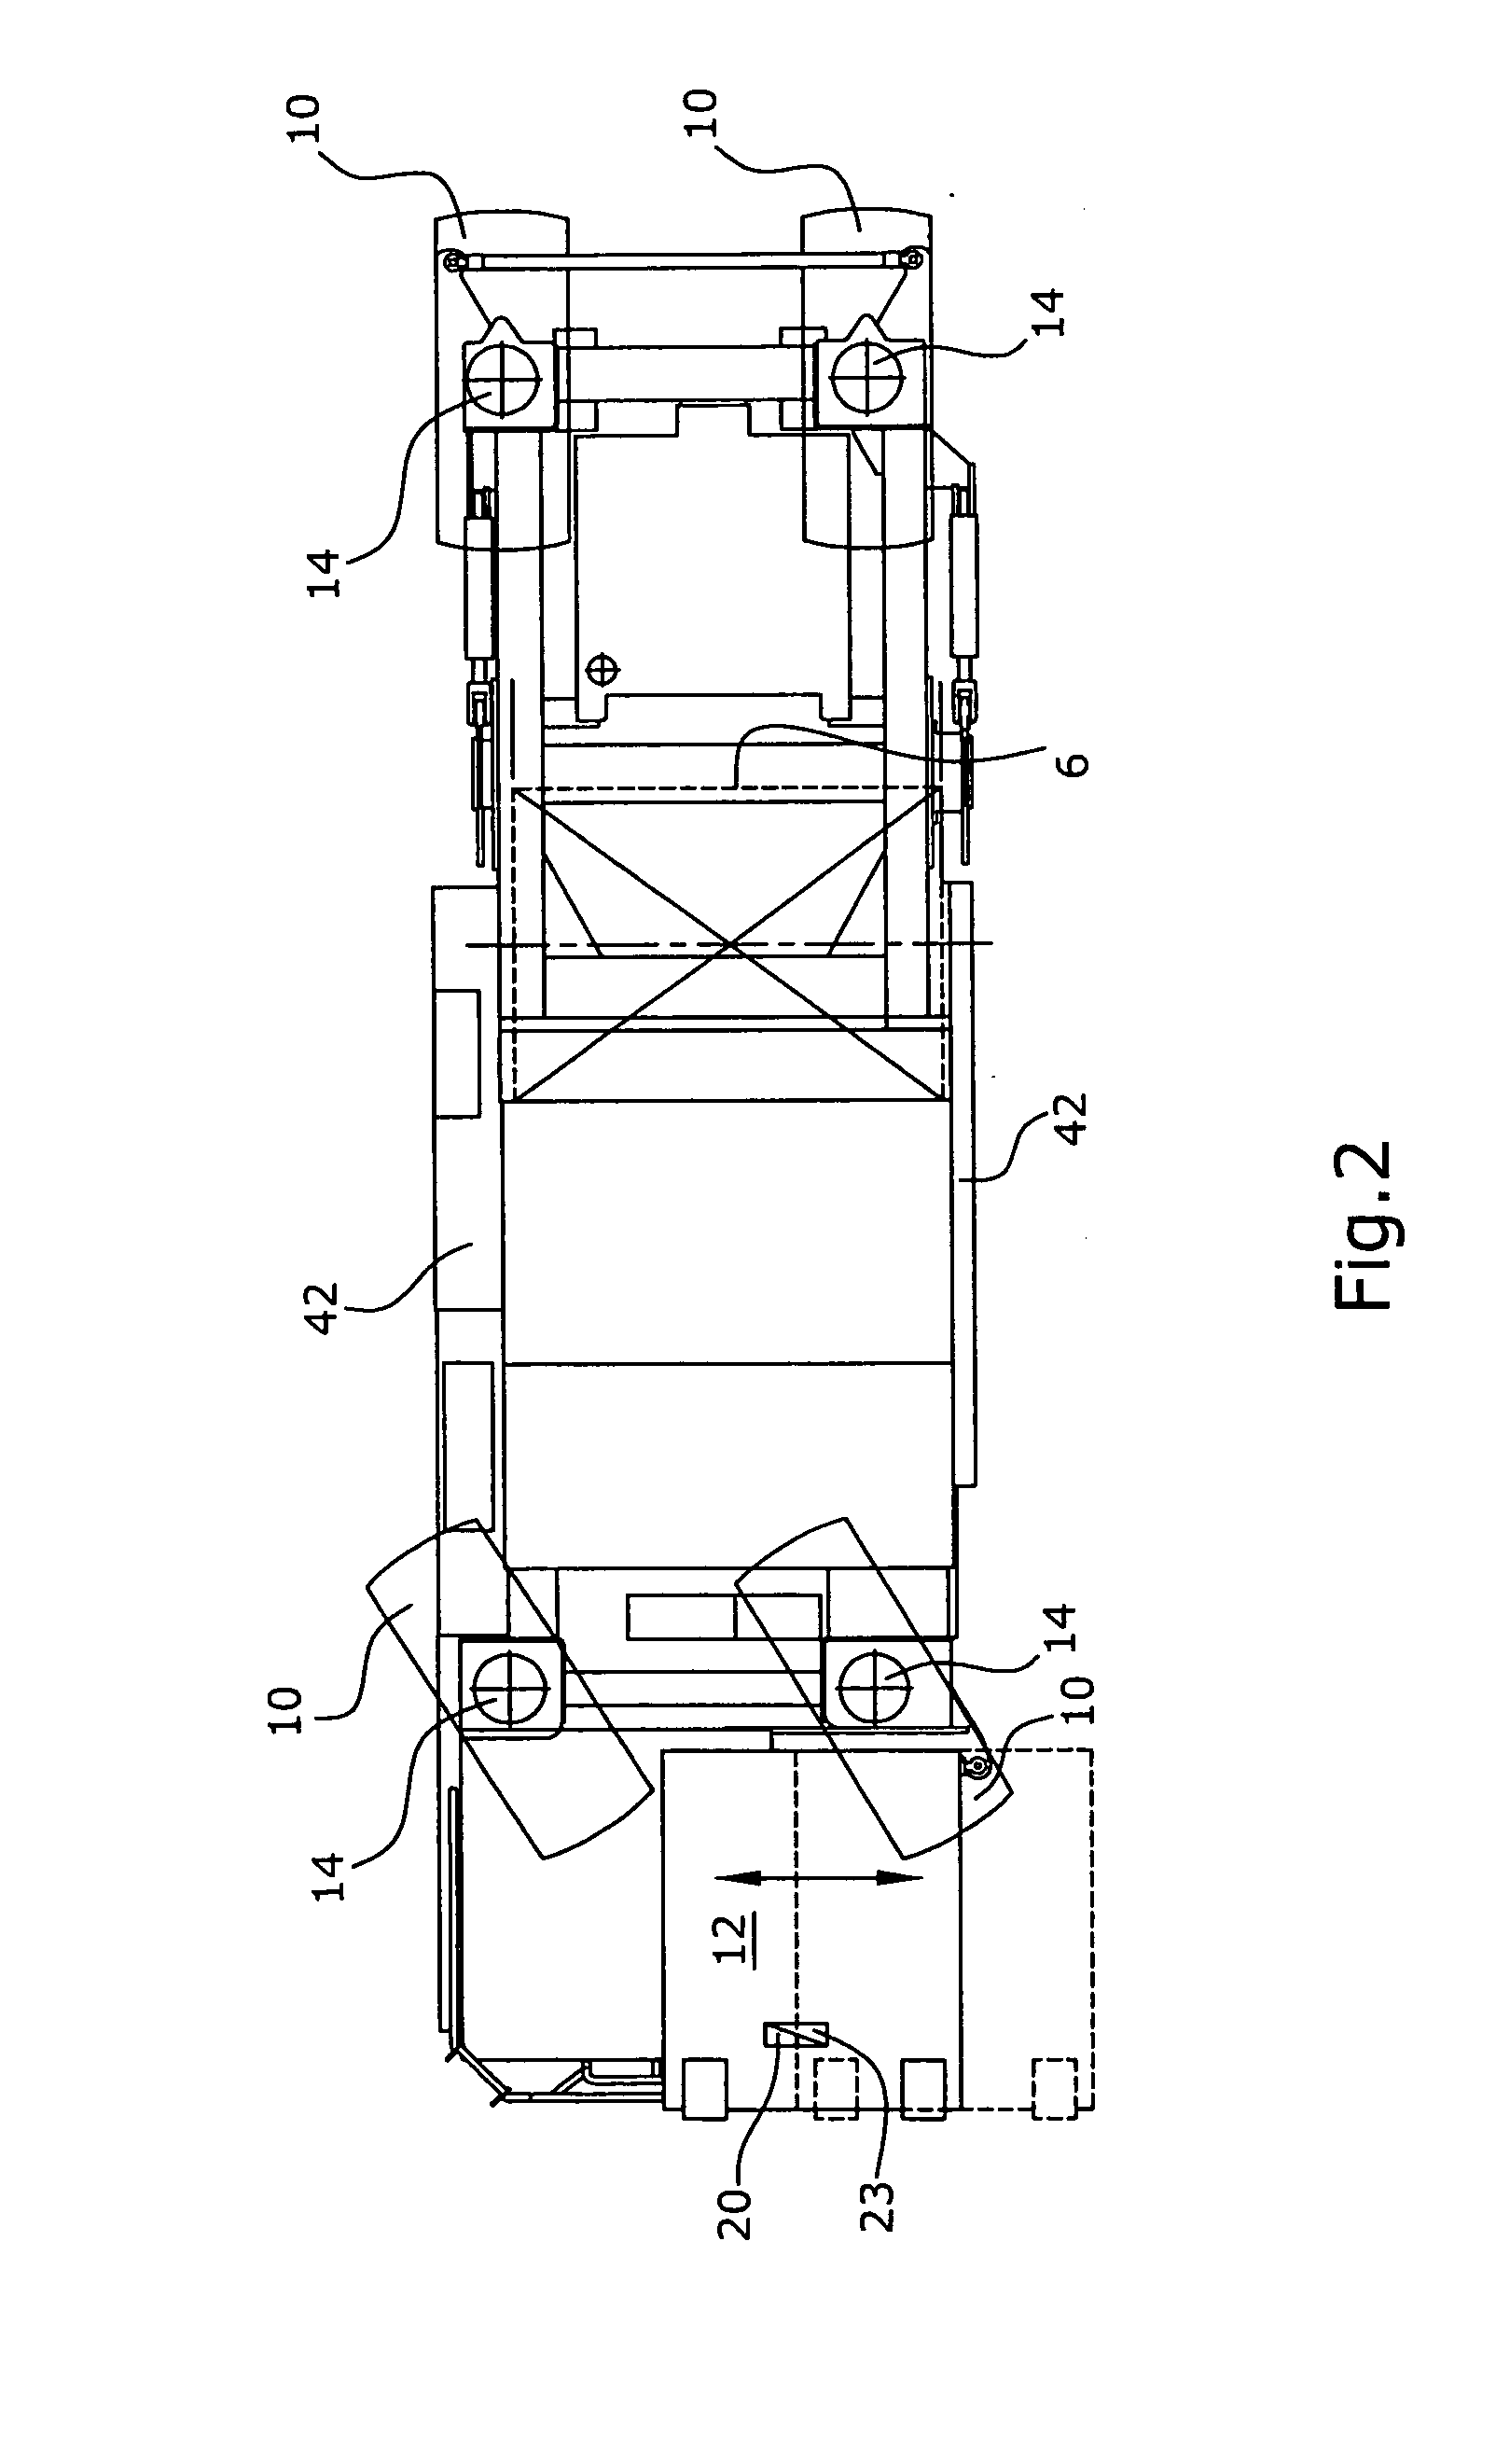 Automotive Construction Engine and Lifting Column for a Contruction Engine